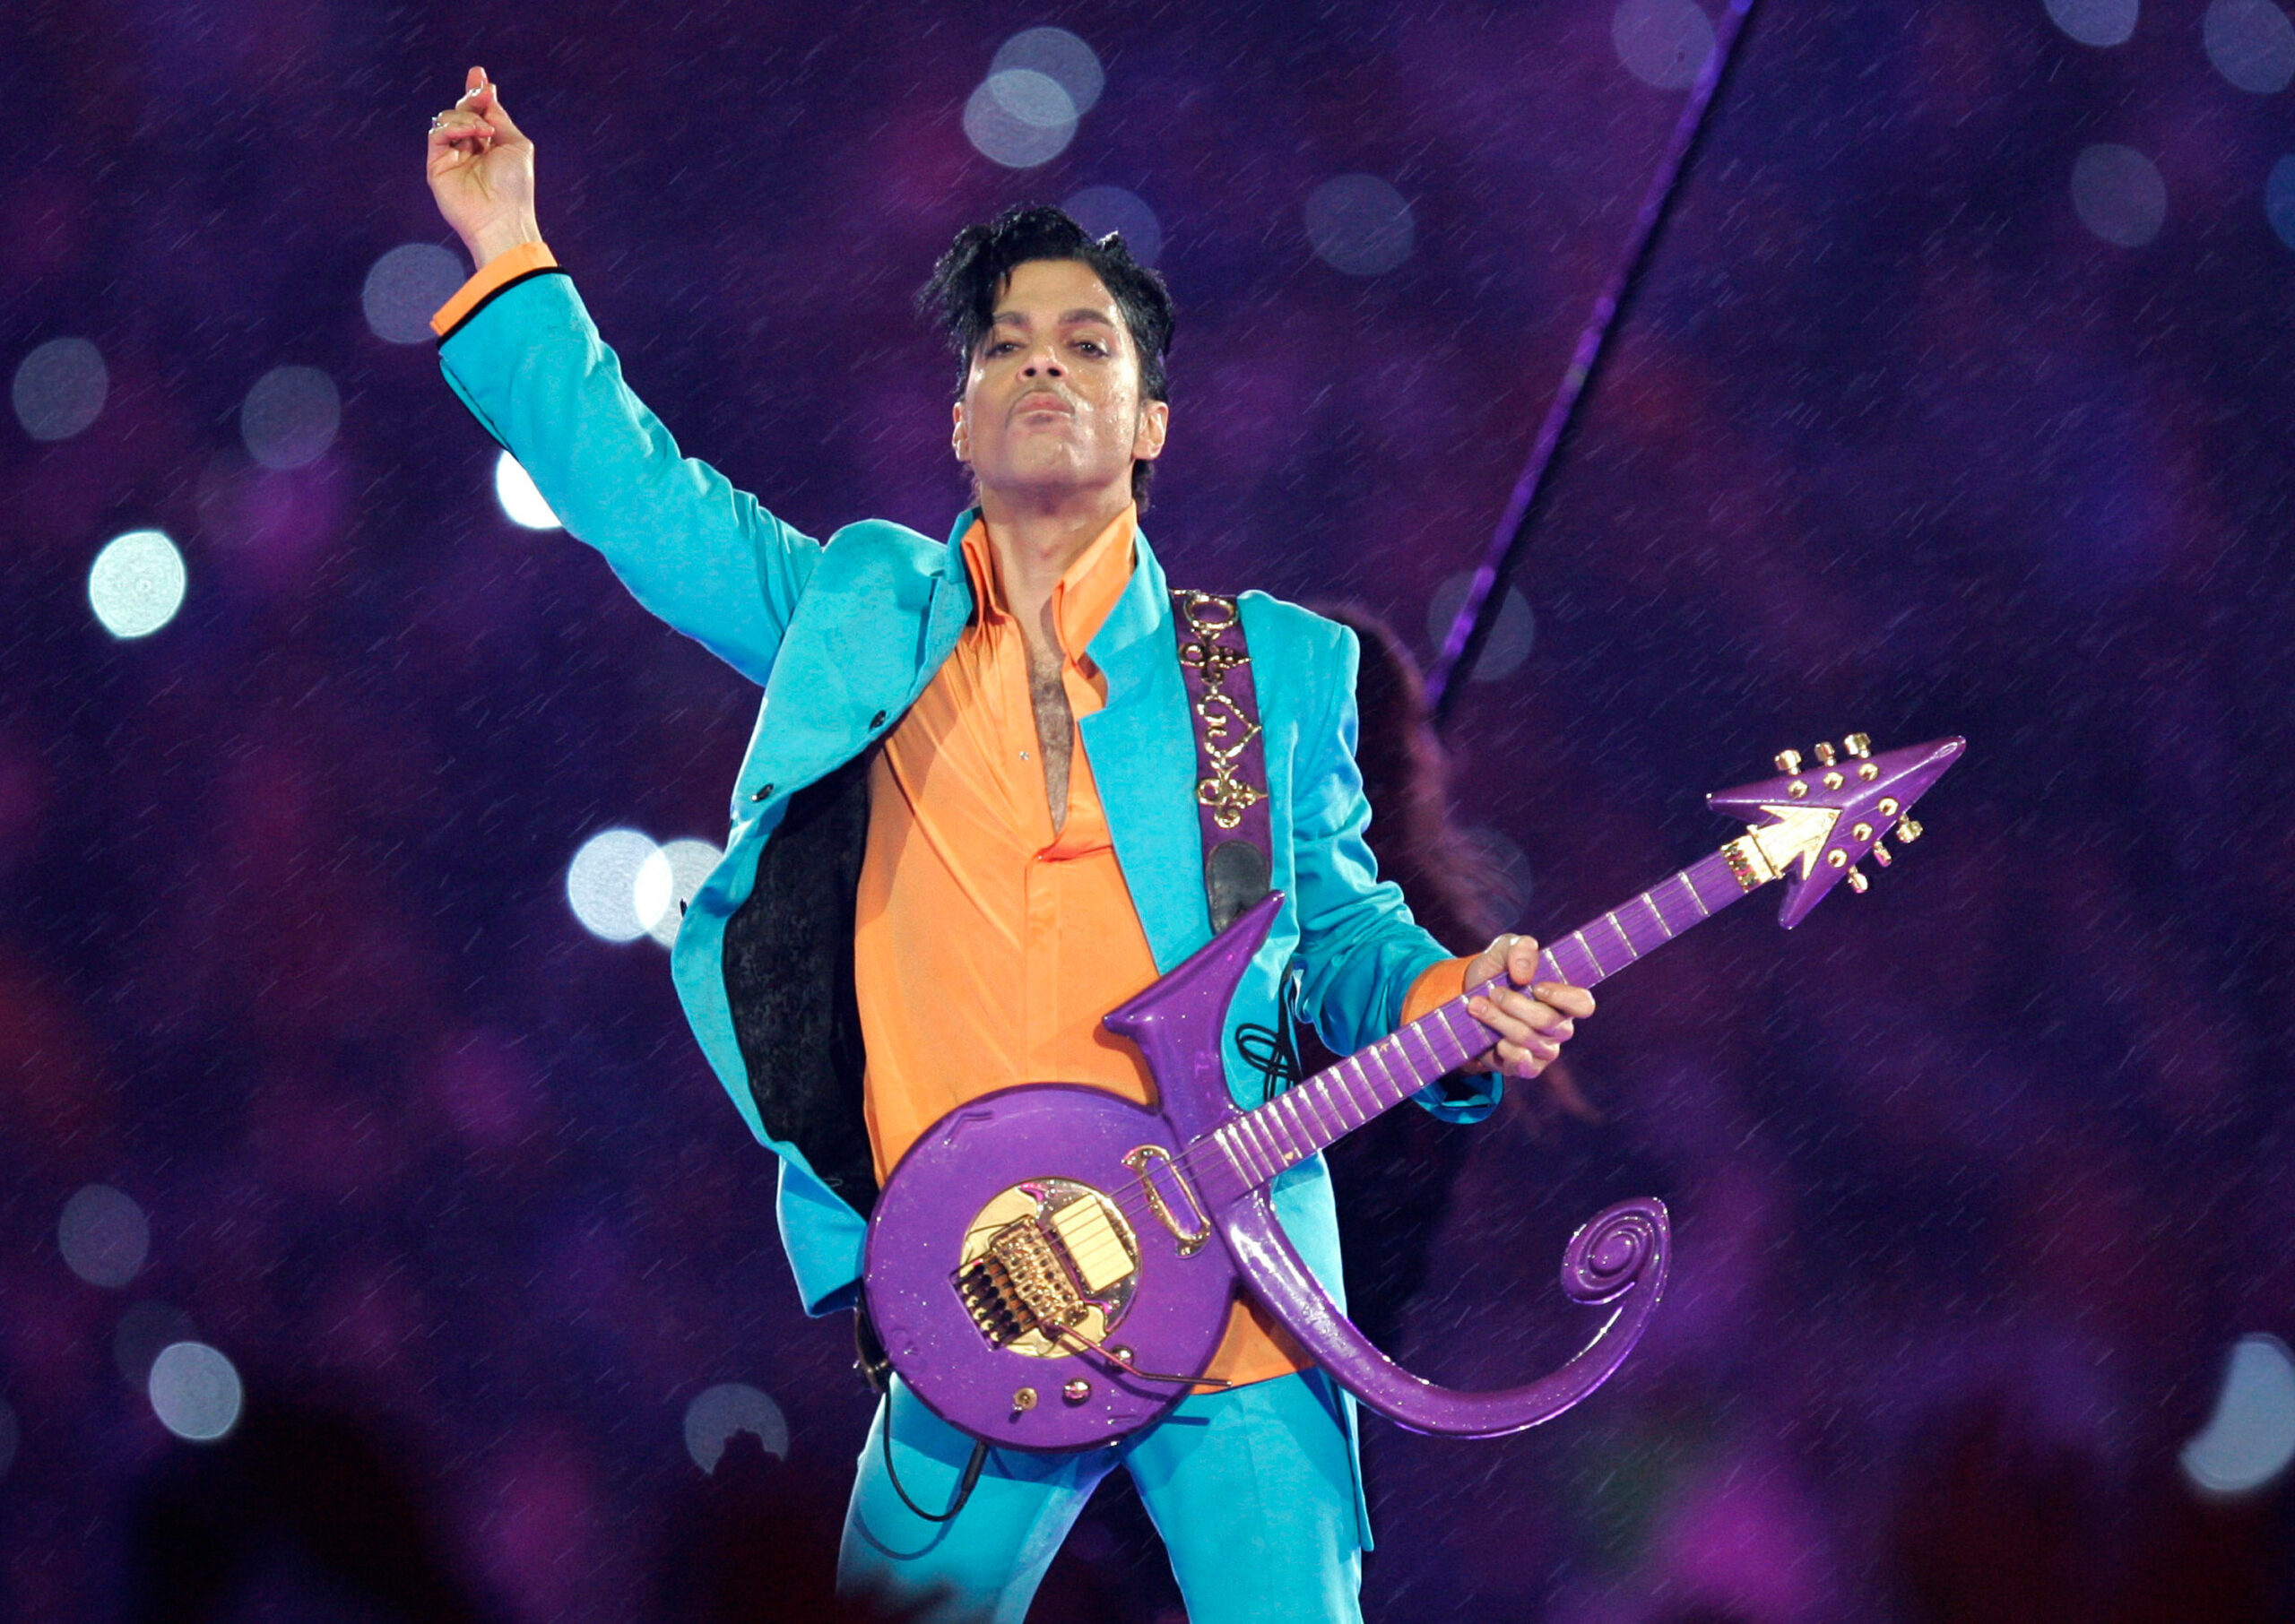 FILE - In this Feb. 4, 2007, file photo, Prince performs during the halftime show at the Super Bowl XLI football game in Miami. Minnesota's Congressional delegation on Monday, Oct. 25, 2021, is introducing a resolution to posthumously award the Congressional Gold Medal to pop superstar Prince, citing his "indelible mark on Minnesota and American culture,” The Associated Press has learned. (AP Photo/Chris O'Meara, File)